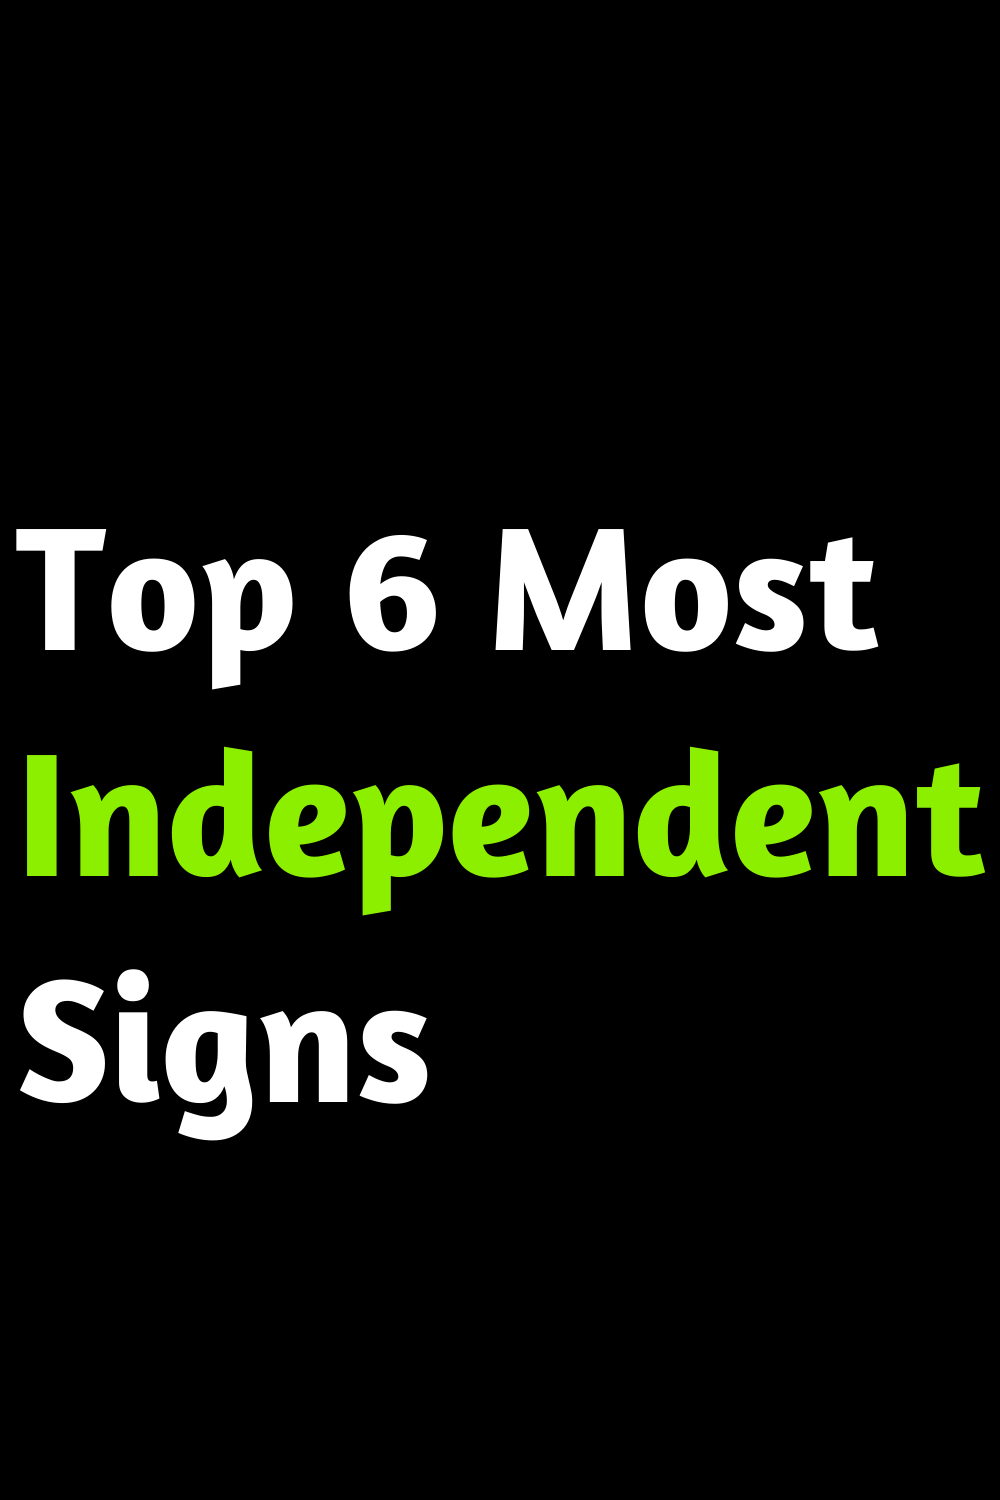 Top 6 Most Independent Signs